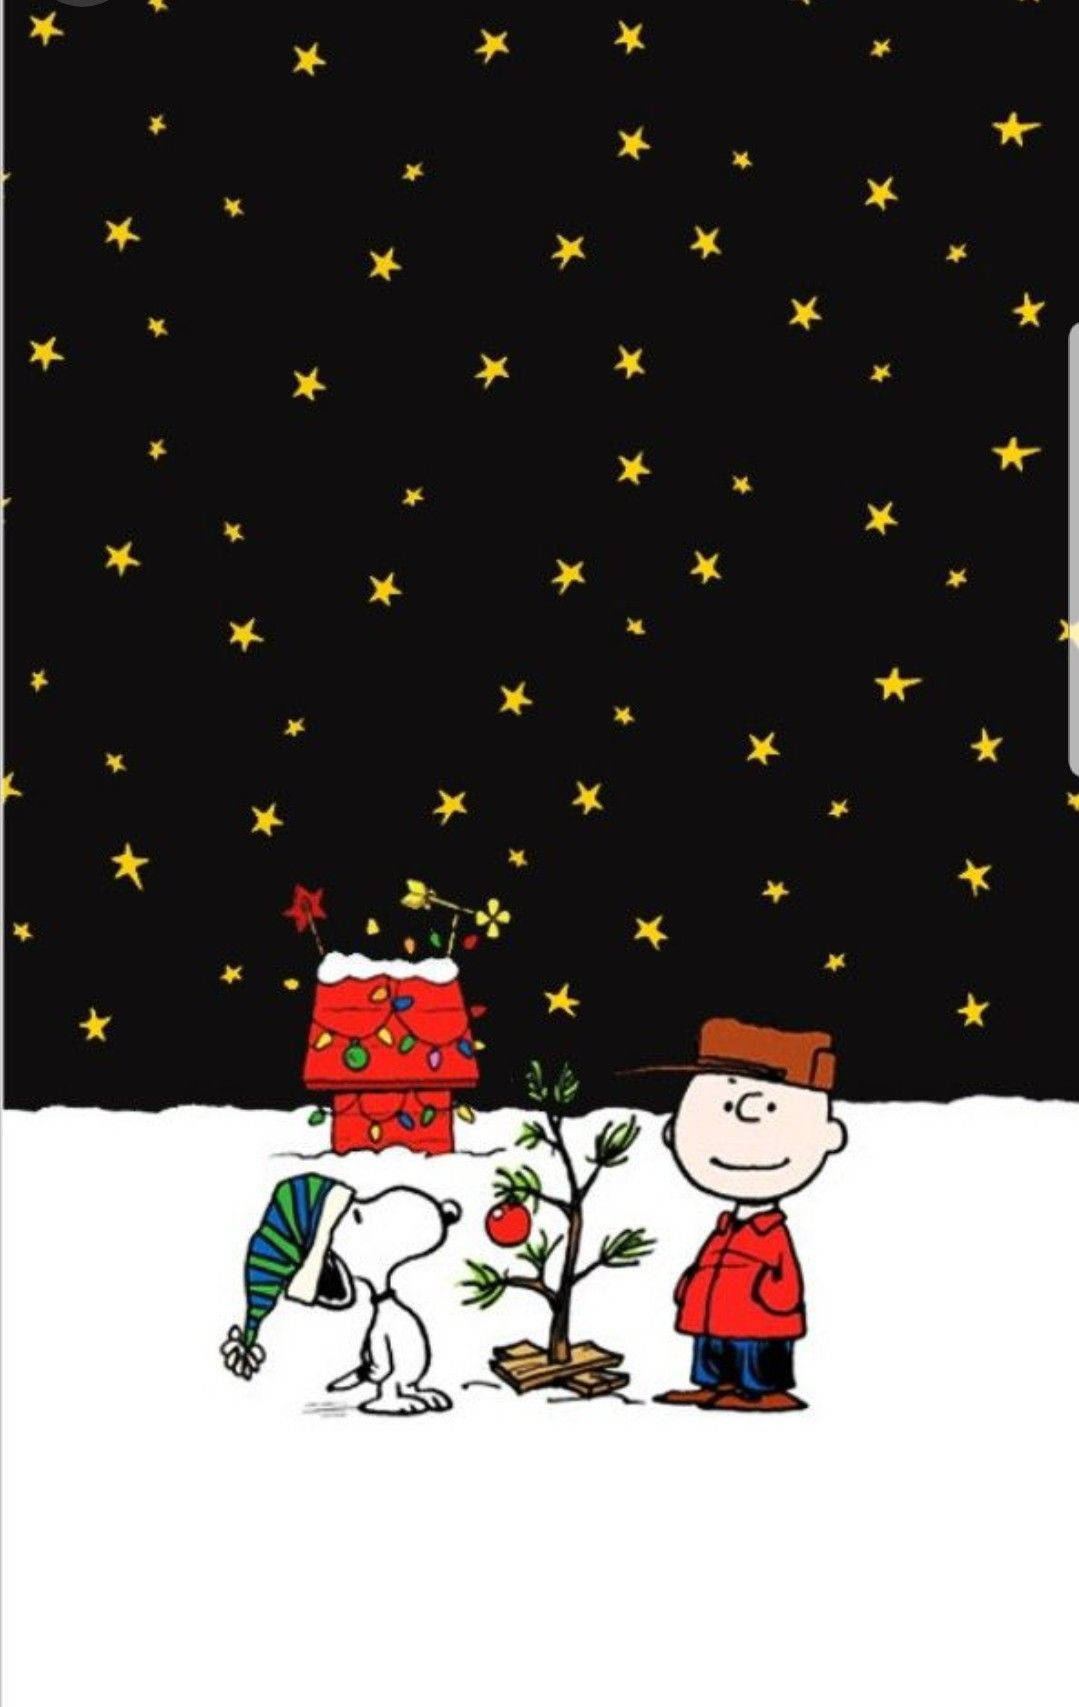 Spread Christmas cheer with Snoopy's festive iPhone wallpaper! Wallpaper